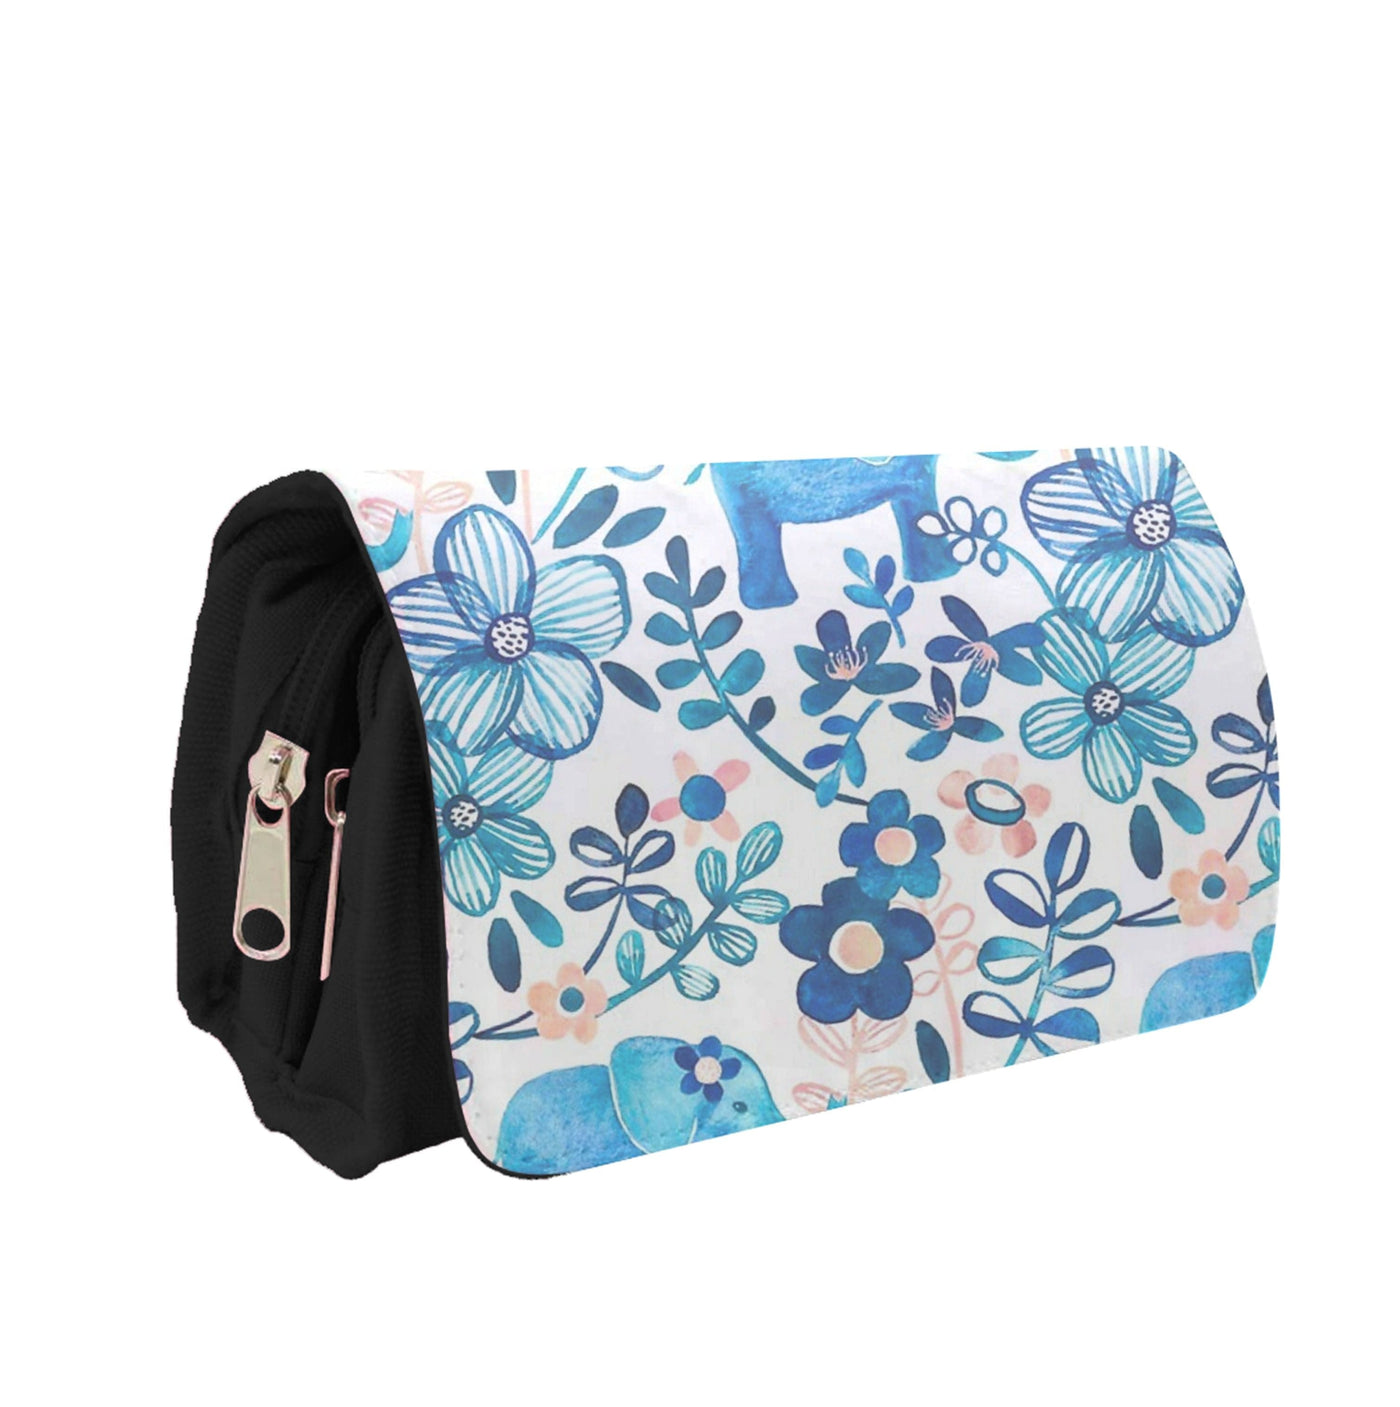 Elephant and Floral Pattern Pencil Case